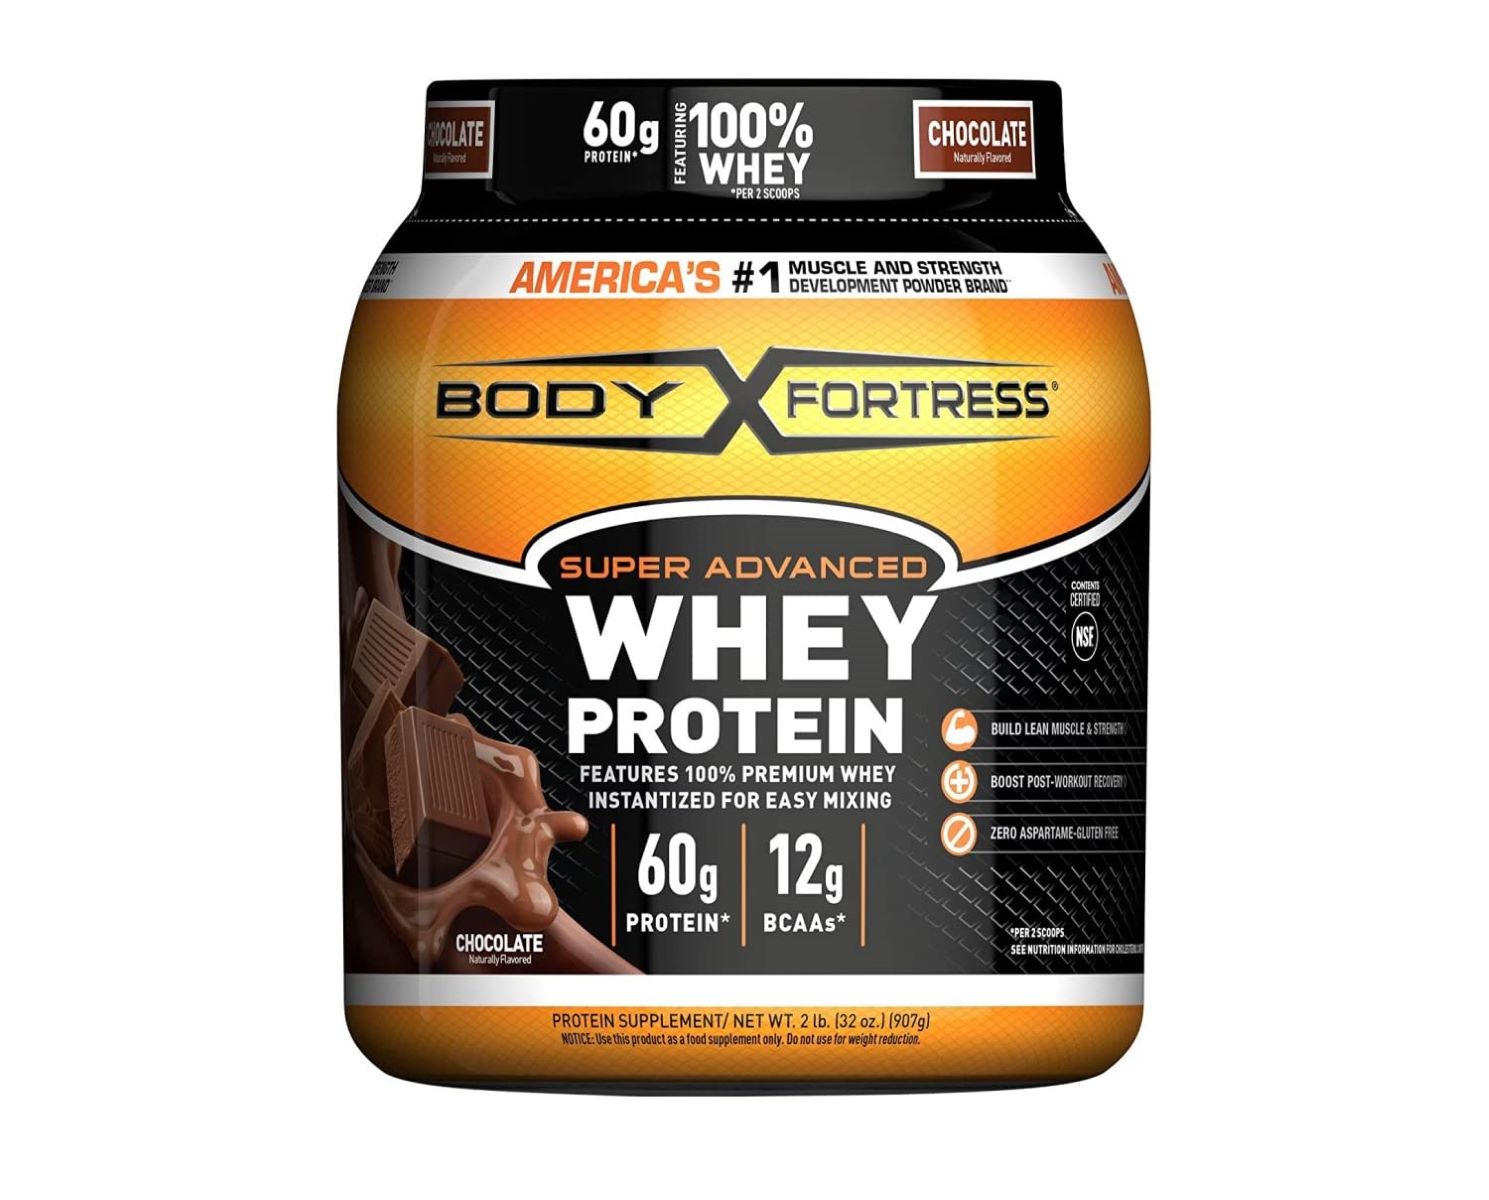 10-whey-protein-body-fortress-nutrition-facts